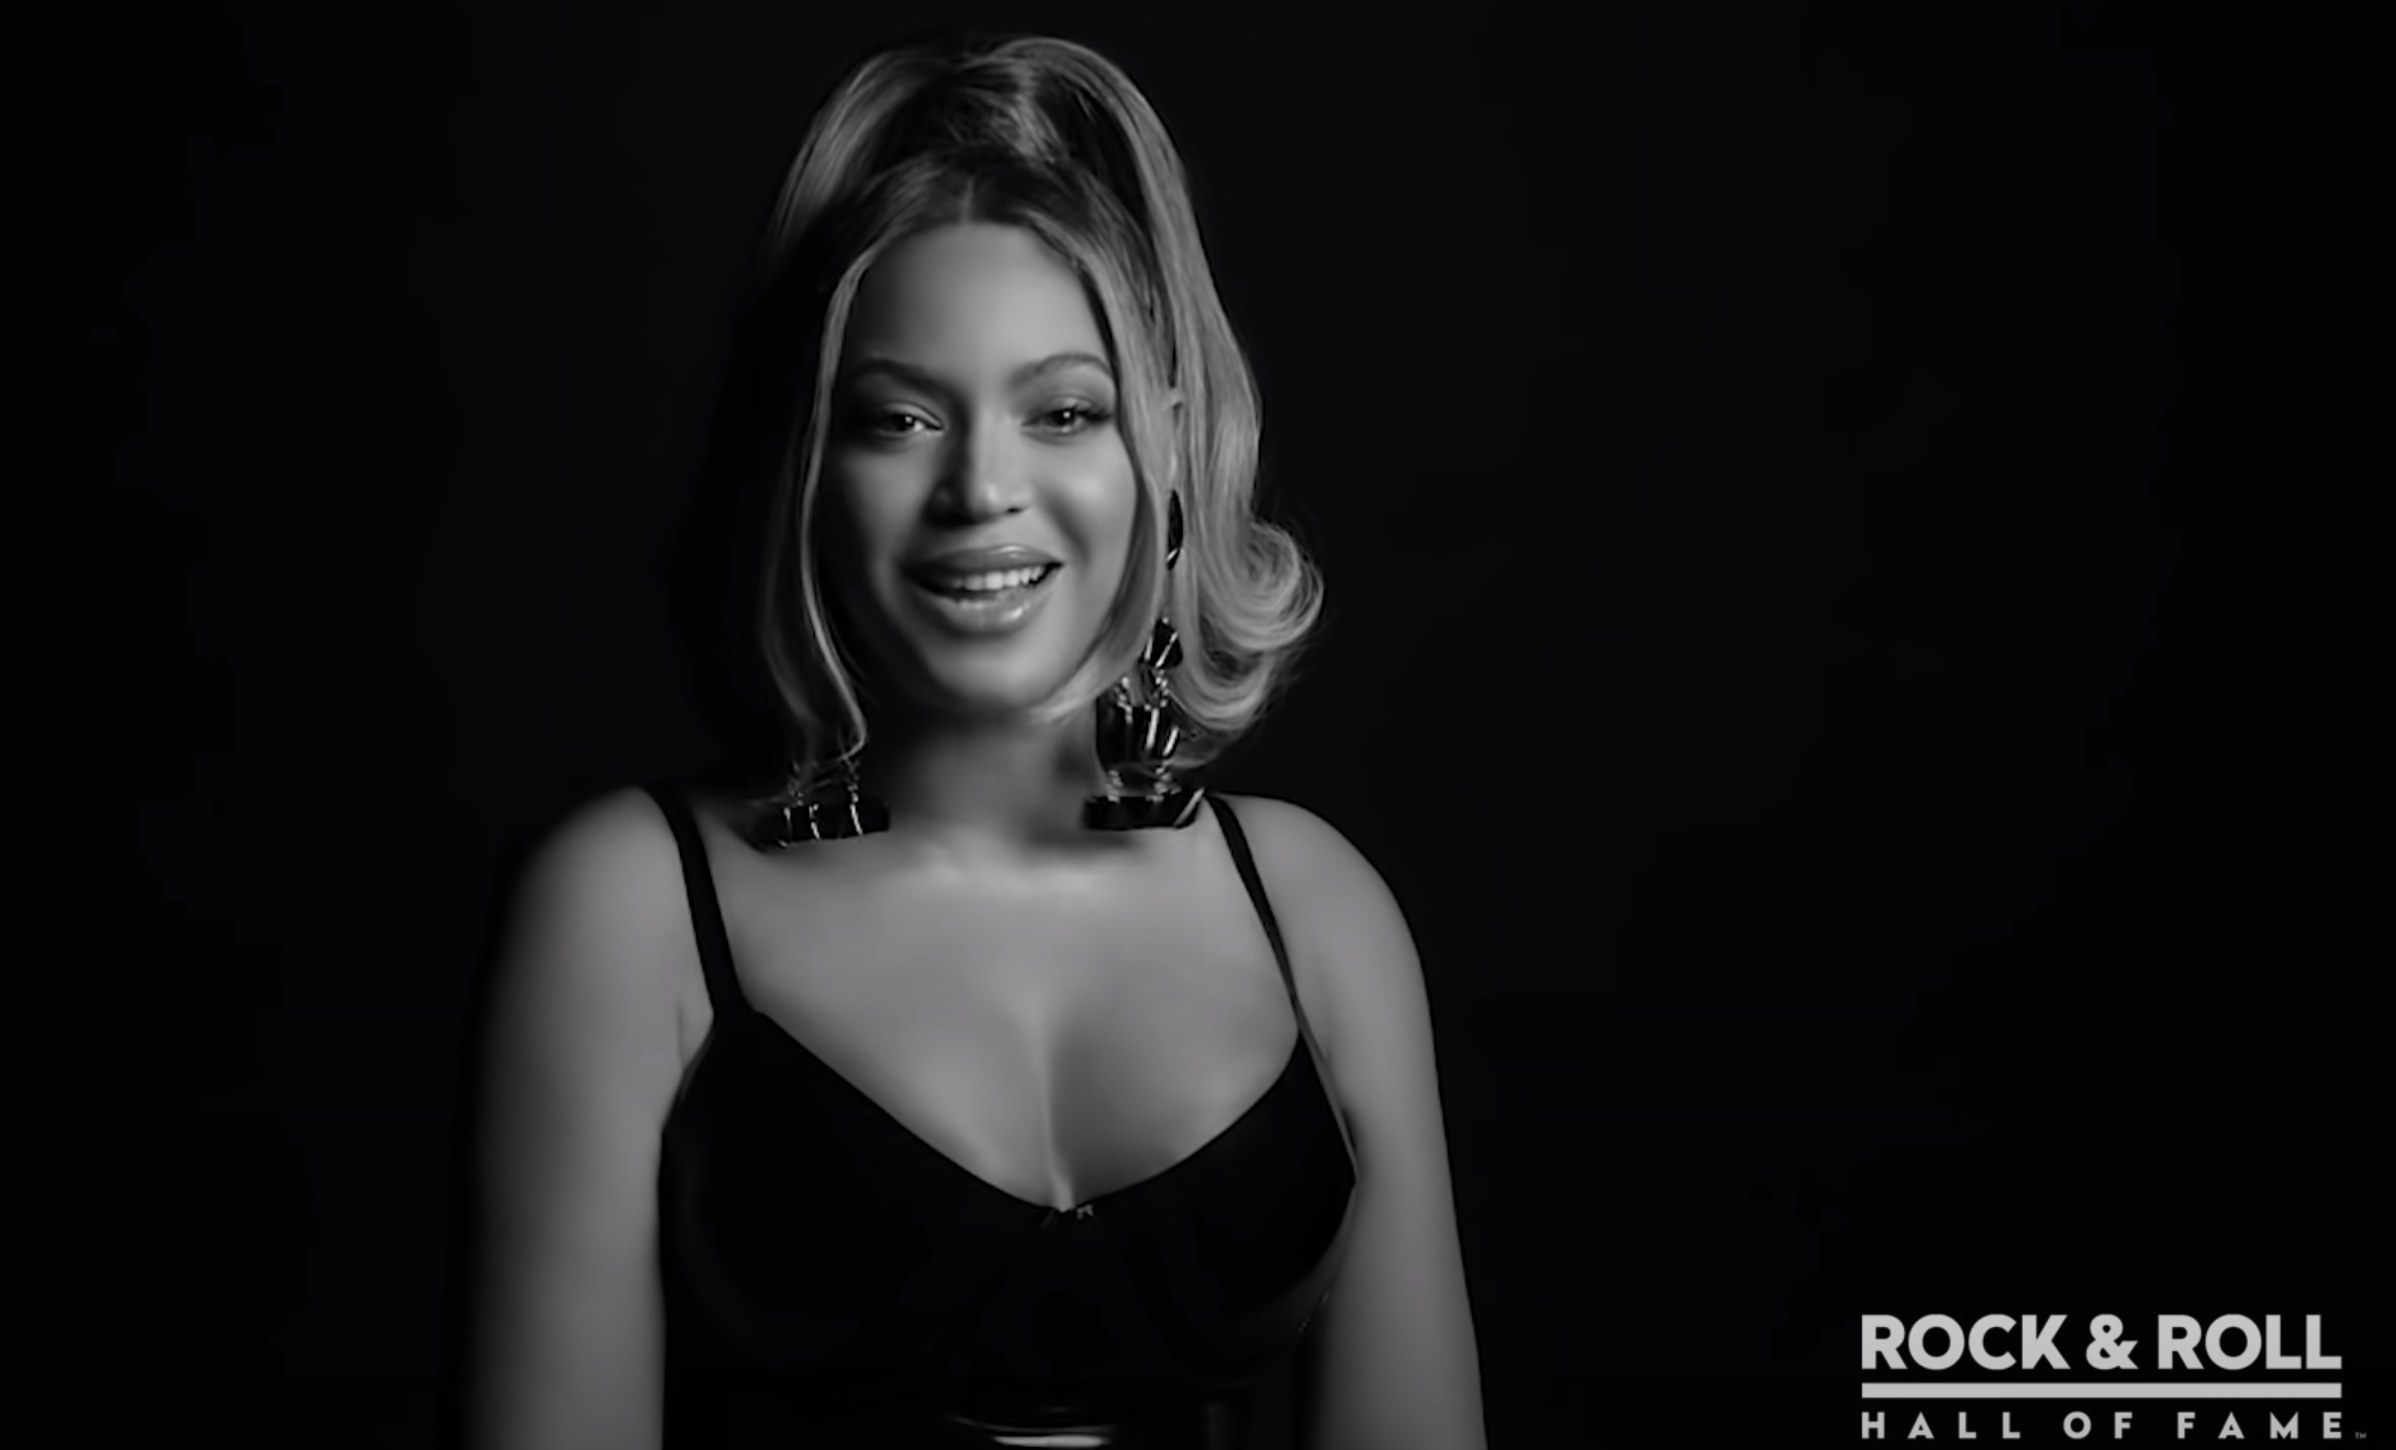 beyonce speaks during her appearance in the video